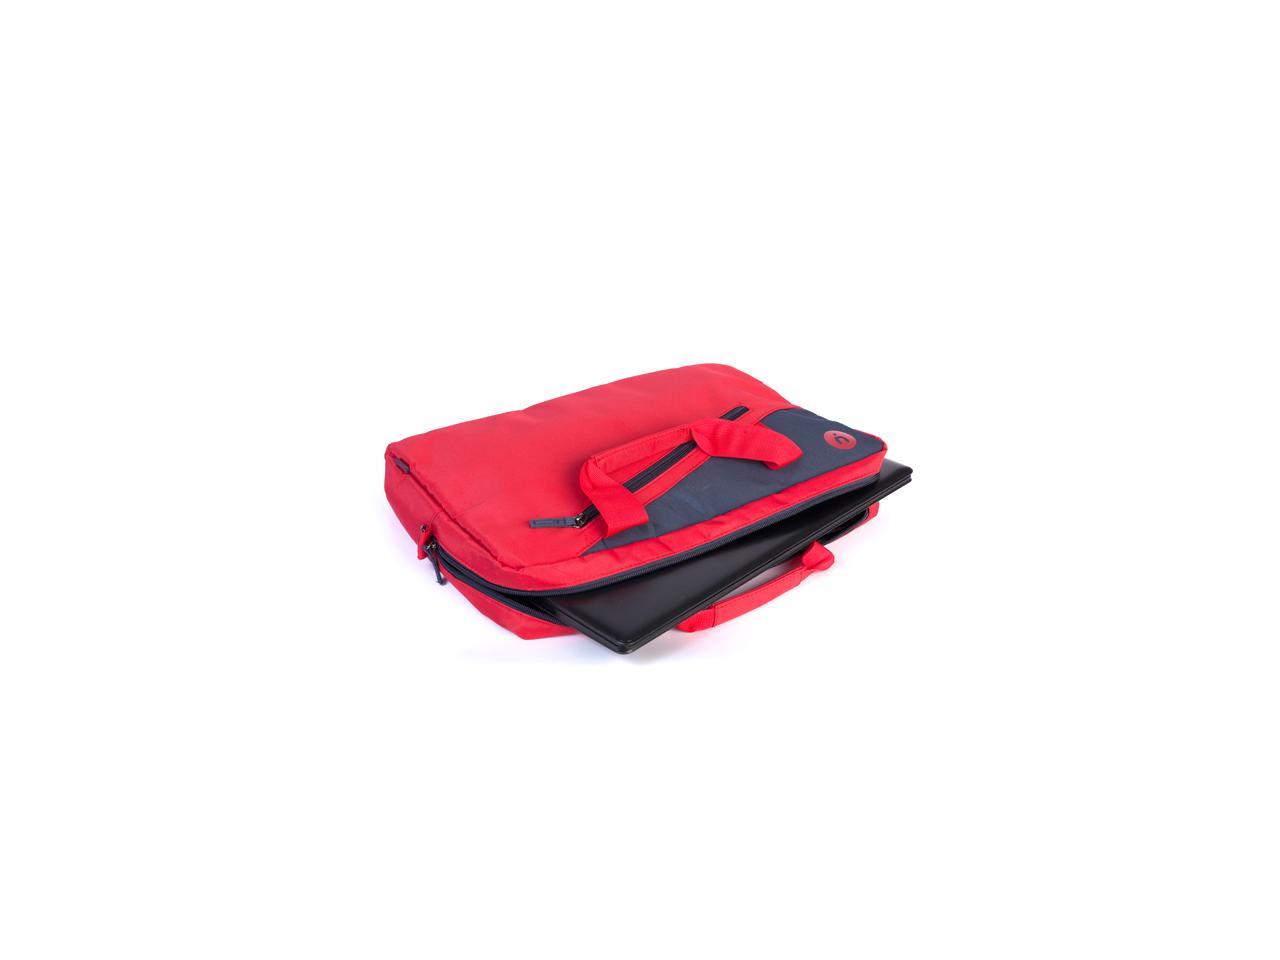 NGS Ginger Red - 15.6" Laptop bag with external pocket - Monray Ginger - Red